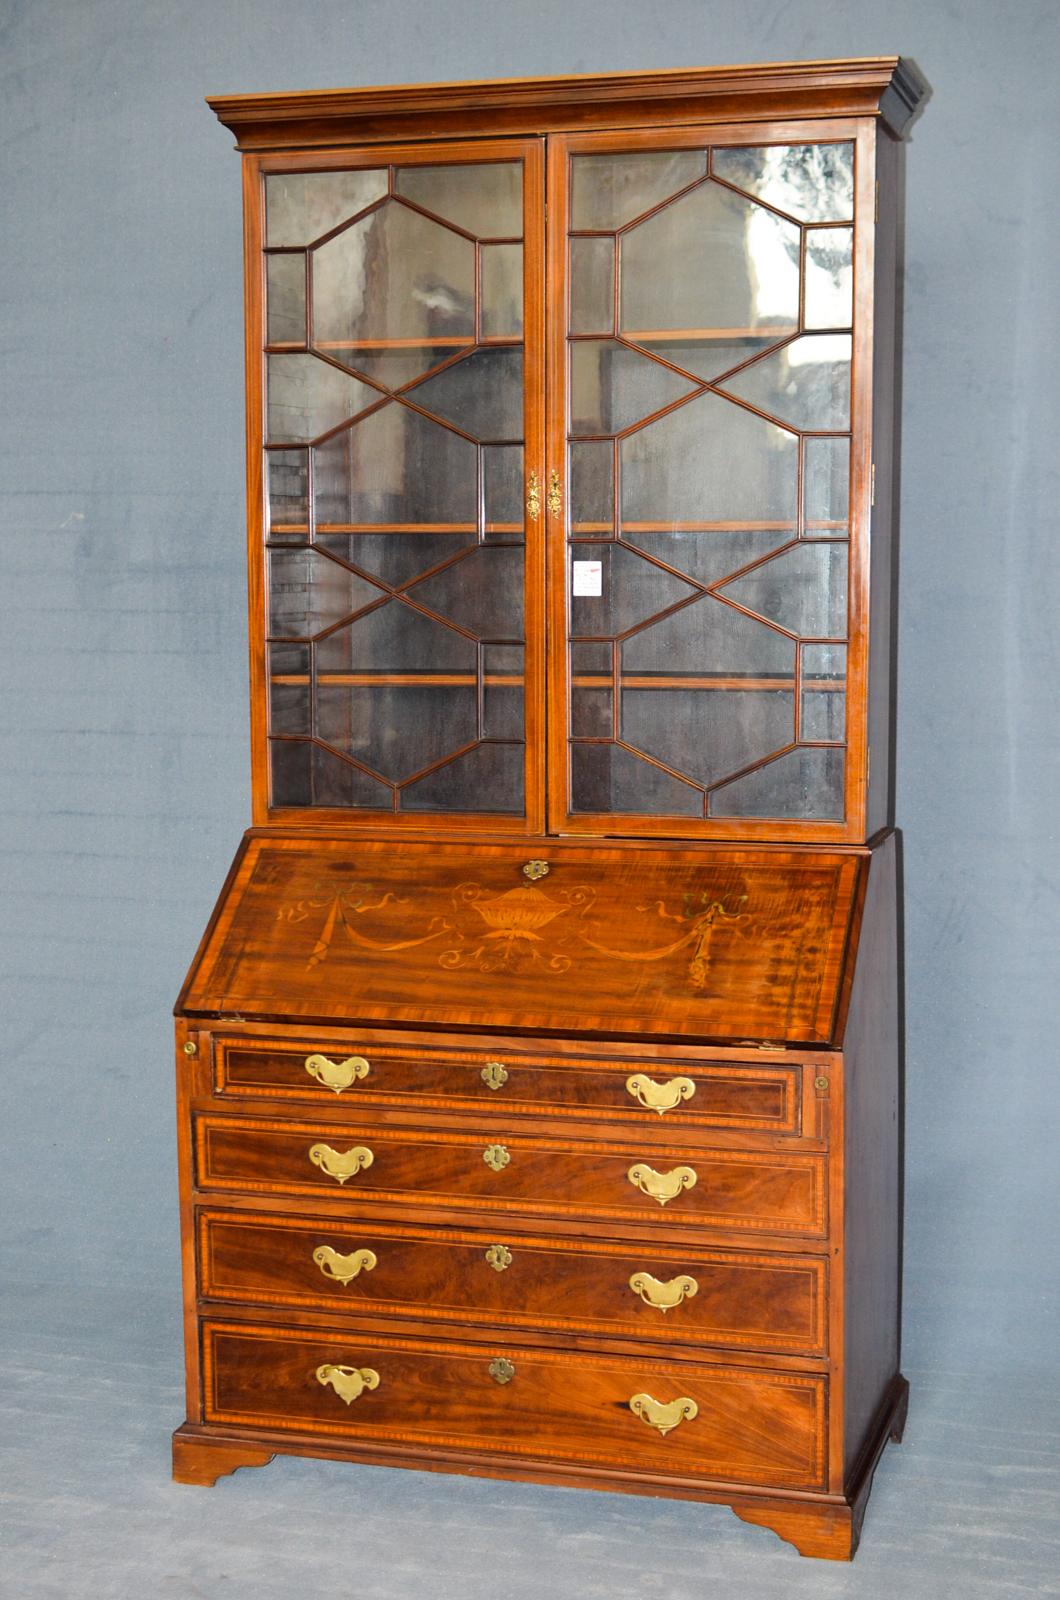 Edwardian bookcase in inlaid mahogany from the United Kingdom and dated 1895. It has a window in the upper part and a Secretaire in the lower part with various internal drawers and four large lower drawers. It has some signs of wear but is in good